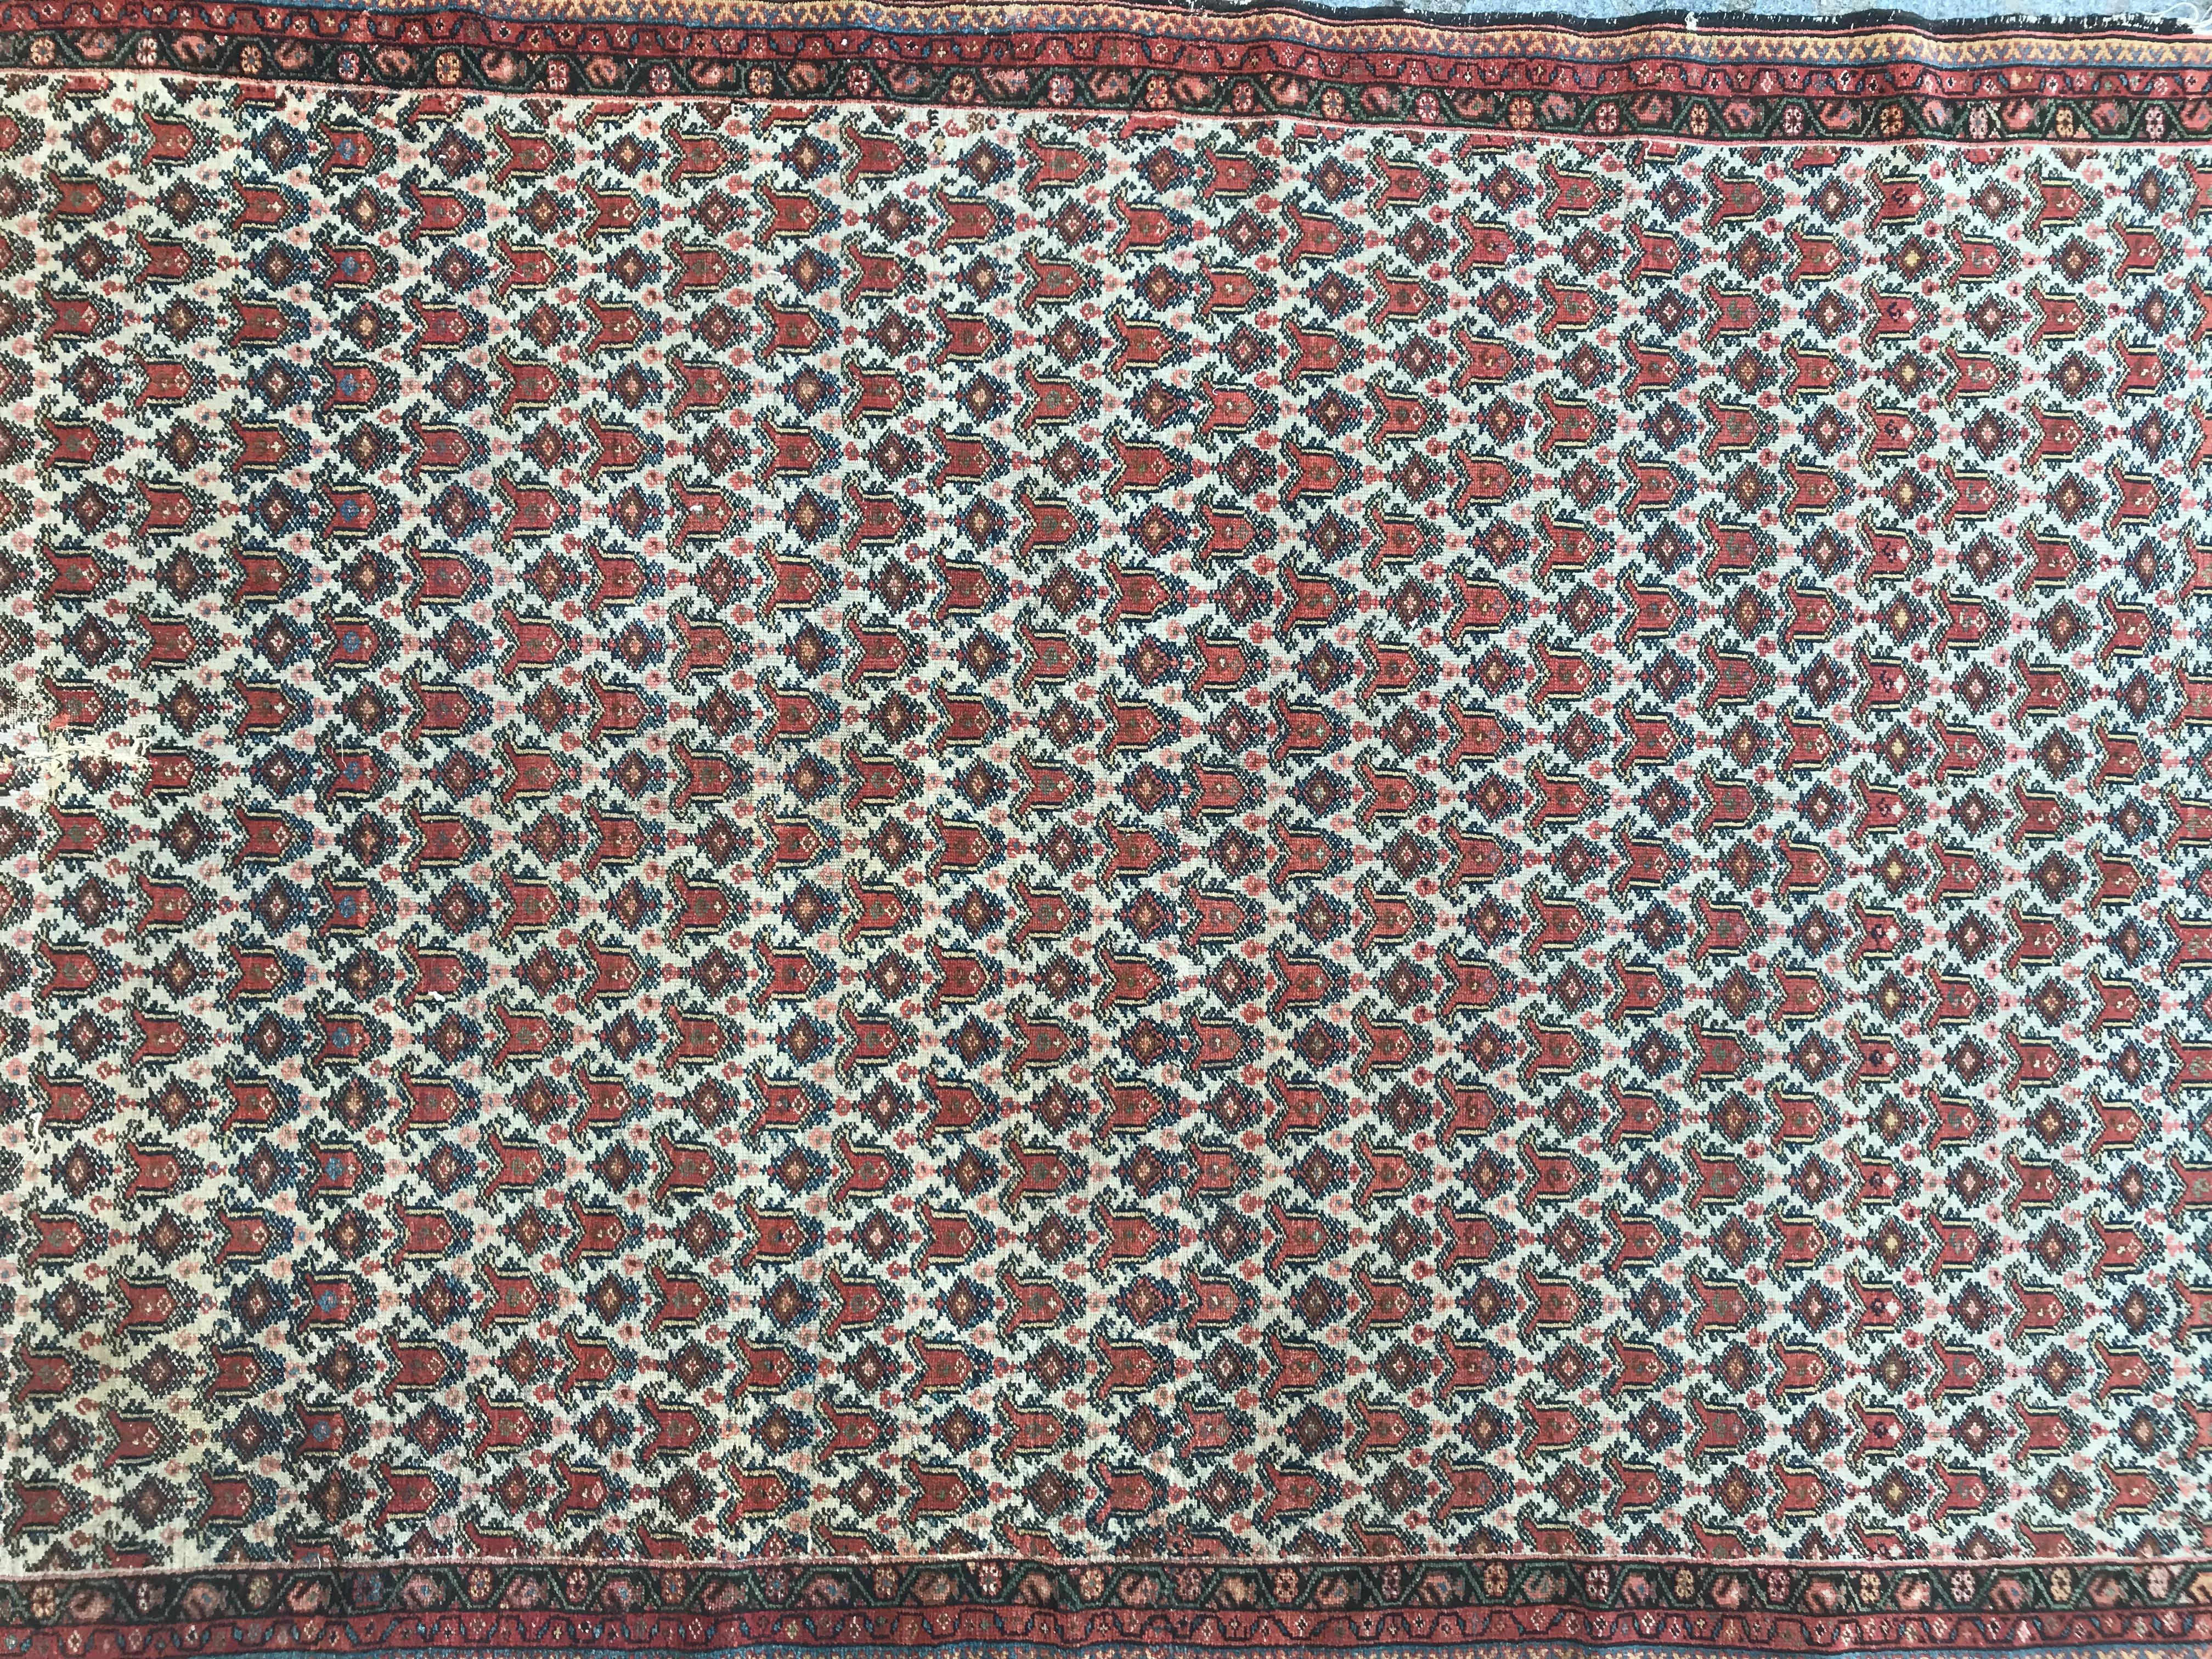 Late 19th century Kurdish Malayer rug with a nice decorative Botteh design and beautiful natural colors with red, yellow, blue and green, entirely hand knotted with wool velvet on cotton foundation.

✨✨✨
